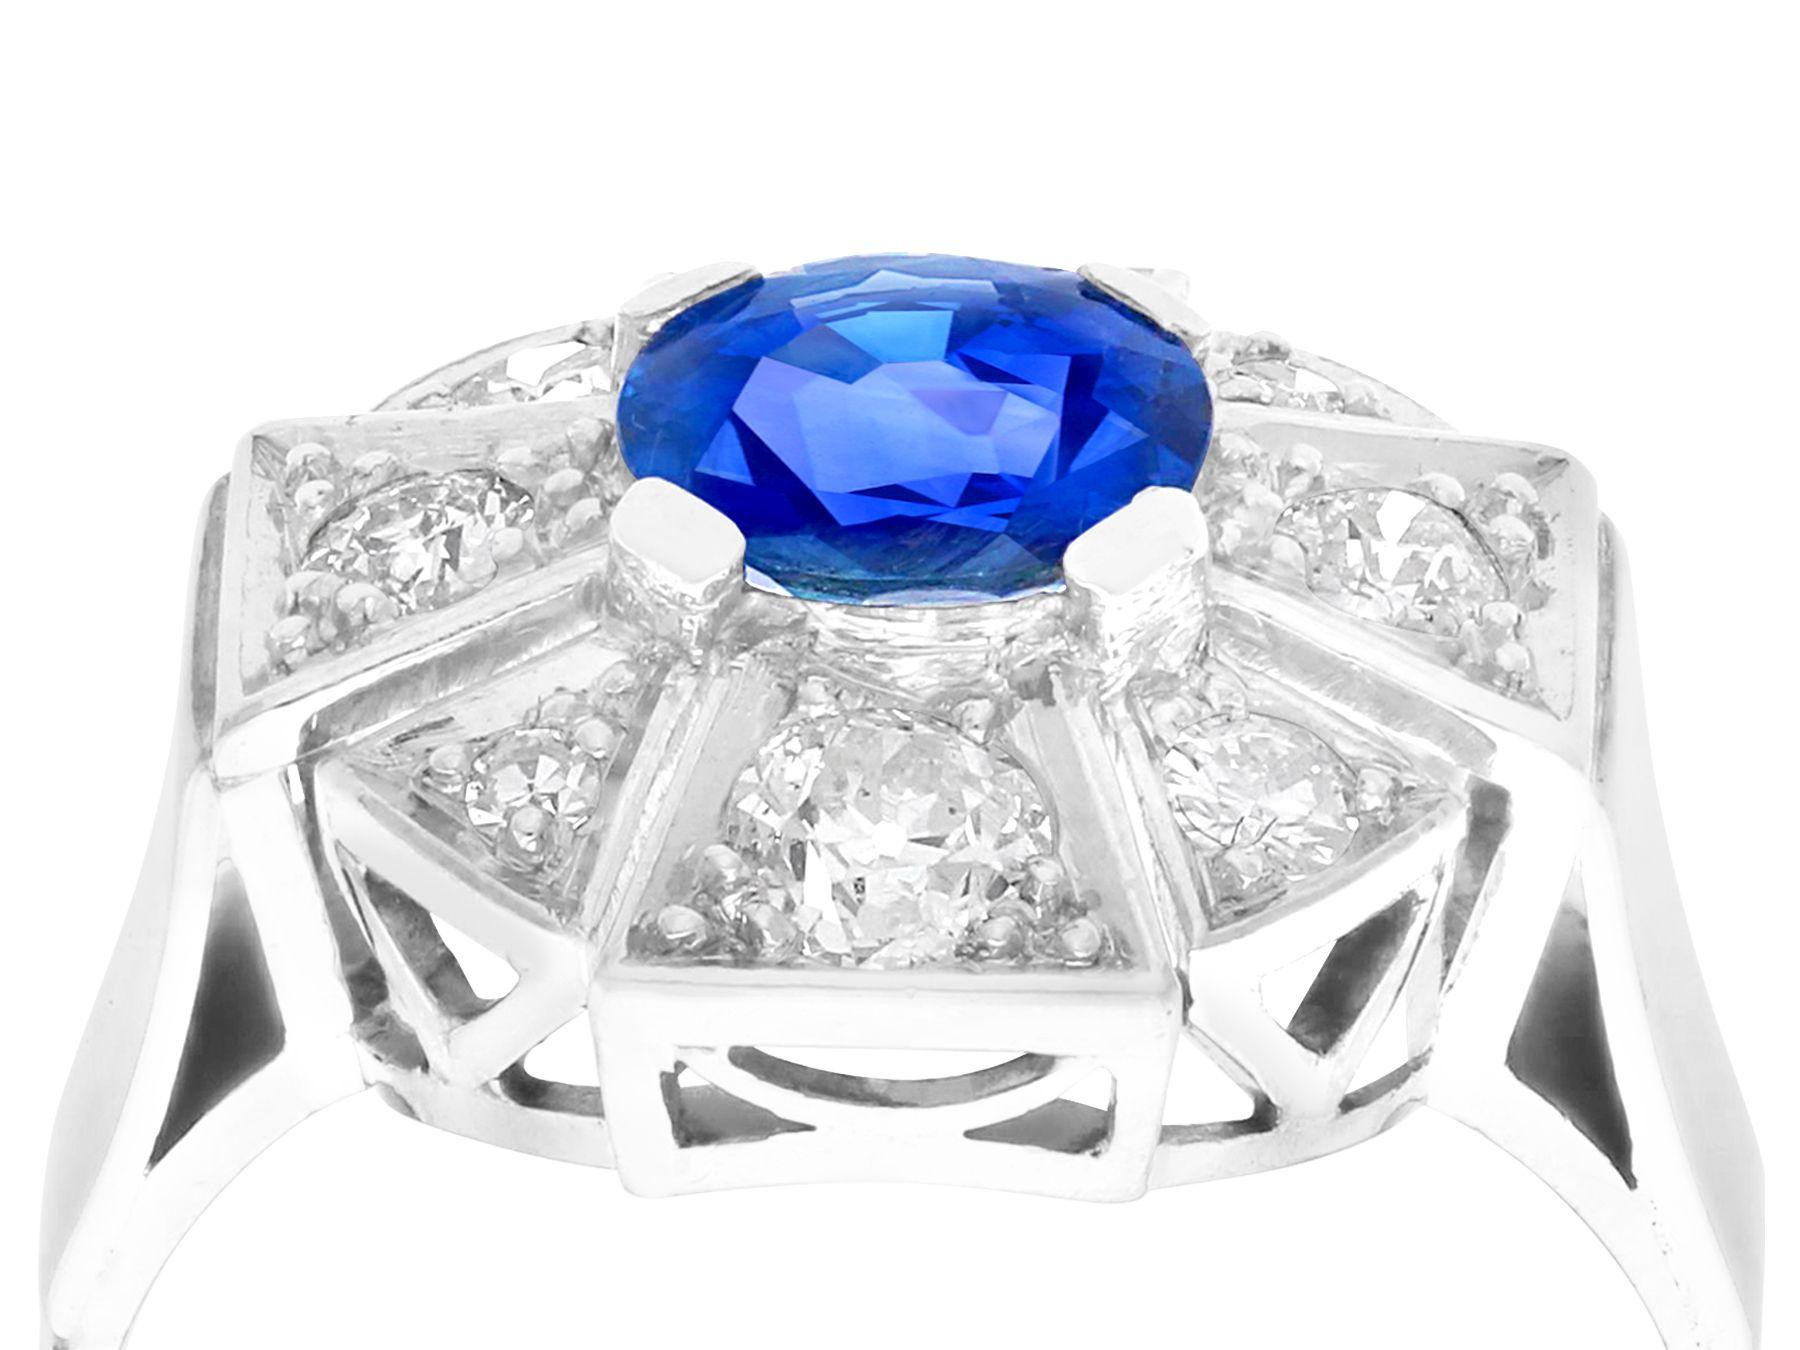 A stunning, fine and impressive 1.69 carat Burmese sapphire and 1.15 carat diamond, 18 karat white gold and platinum set dress ring; part of our diverse antique jewelry and estate jewelry collections. 

This stunning, fine and impressive blue